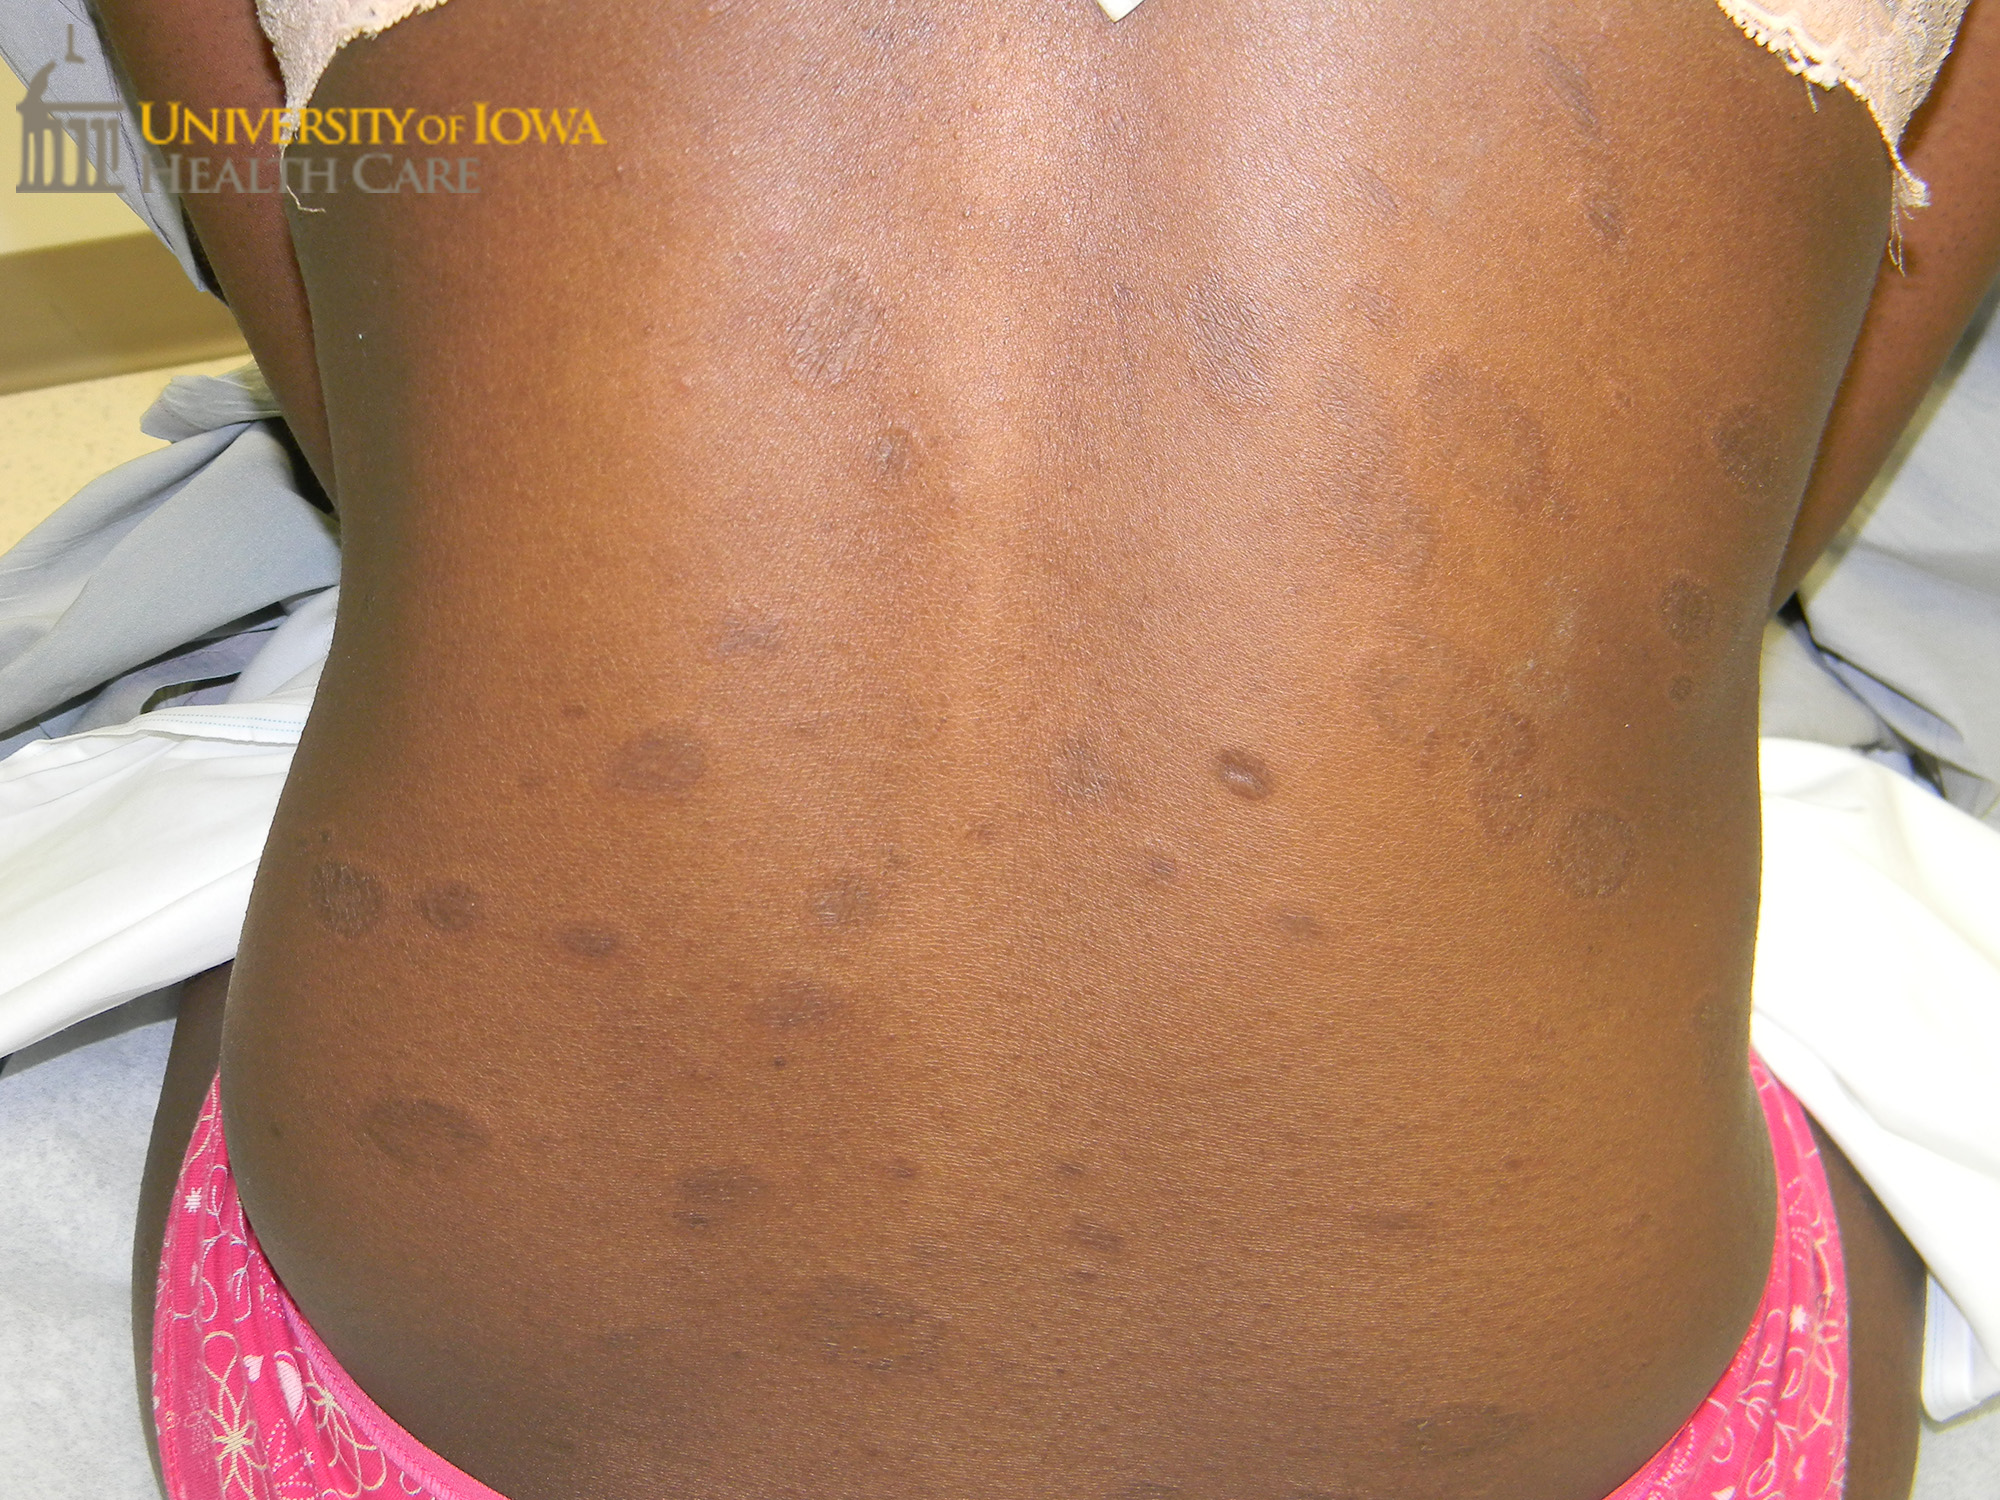 Ovoid gray-brown papules and plaques with fine scale. (click images for higher resolution).